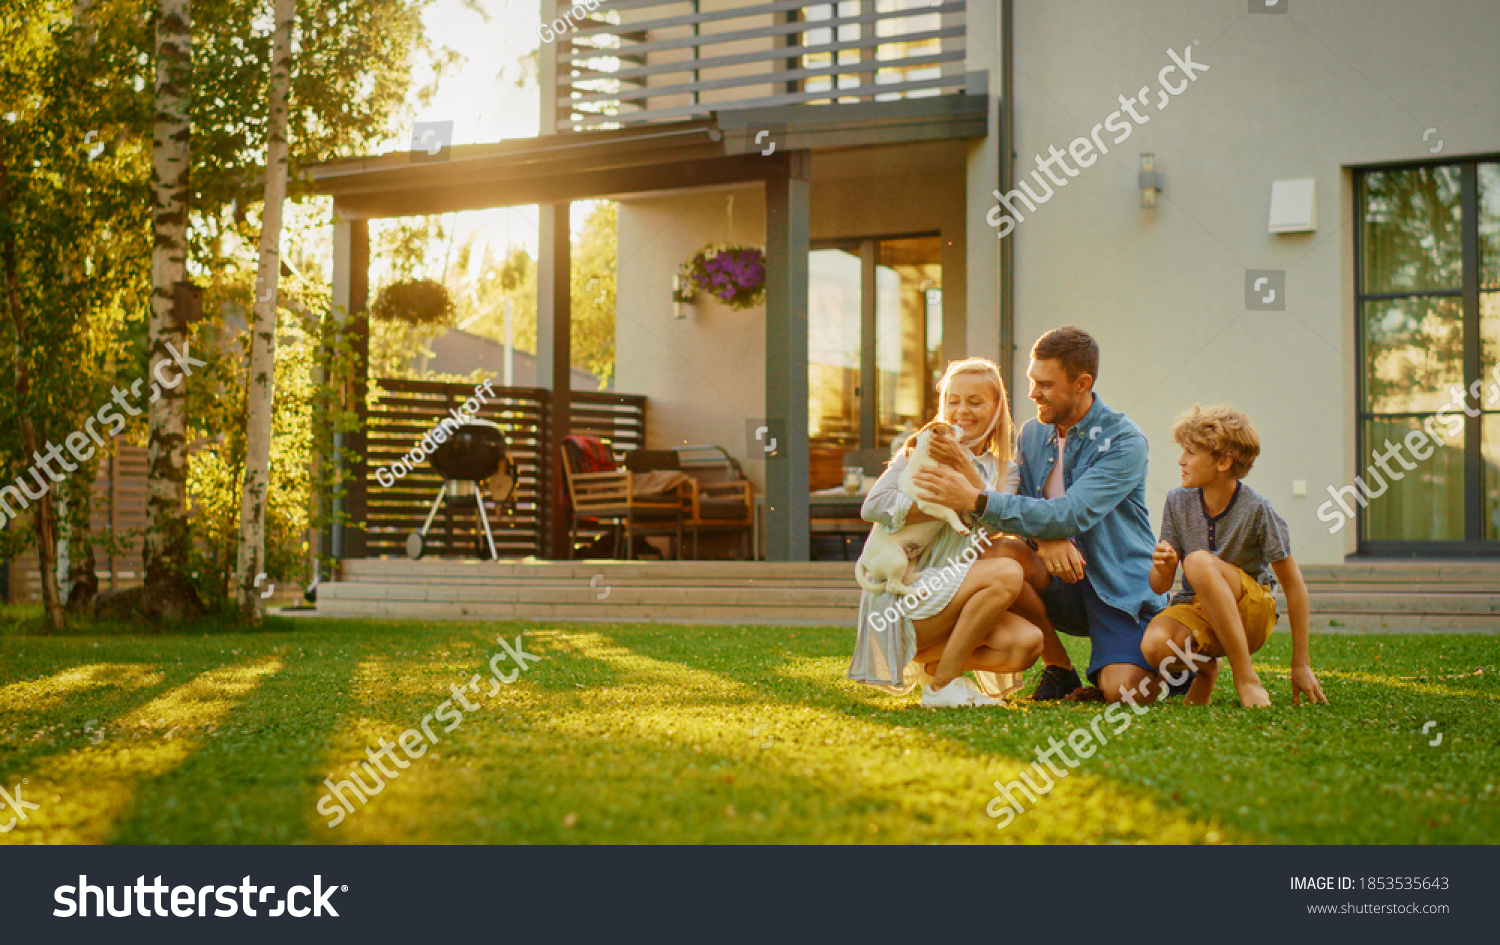 Smiling Father, Mother and Son Pet and Play with Smooth Fox Terrier Retriever Dog. Sun Shines on Idyllic Happy Family with Loyal Pedigree Dog have Fun at the Idyllic Suburban House Backyard #1853535643